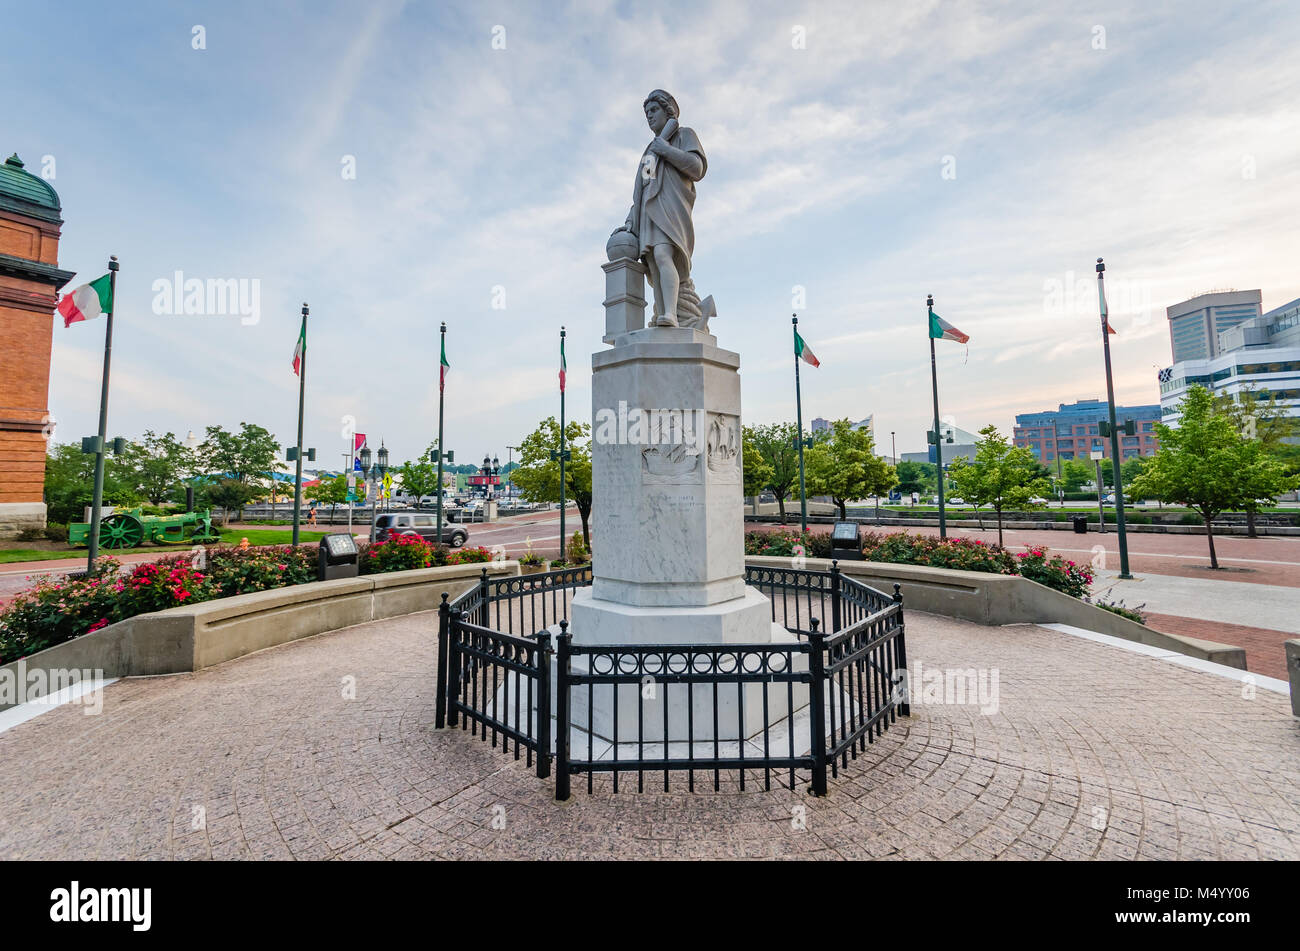 Dedicated in 1984 and located near Little Italy in Baltimore, Maryland, the Italian Carrara marble monument commemorates the city's Italian heritage. Stock Photo